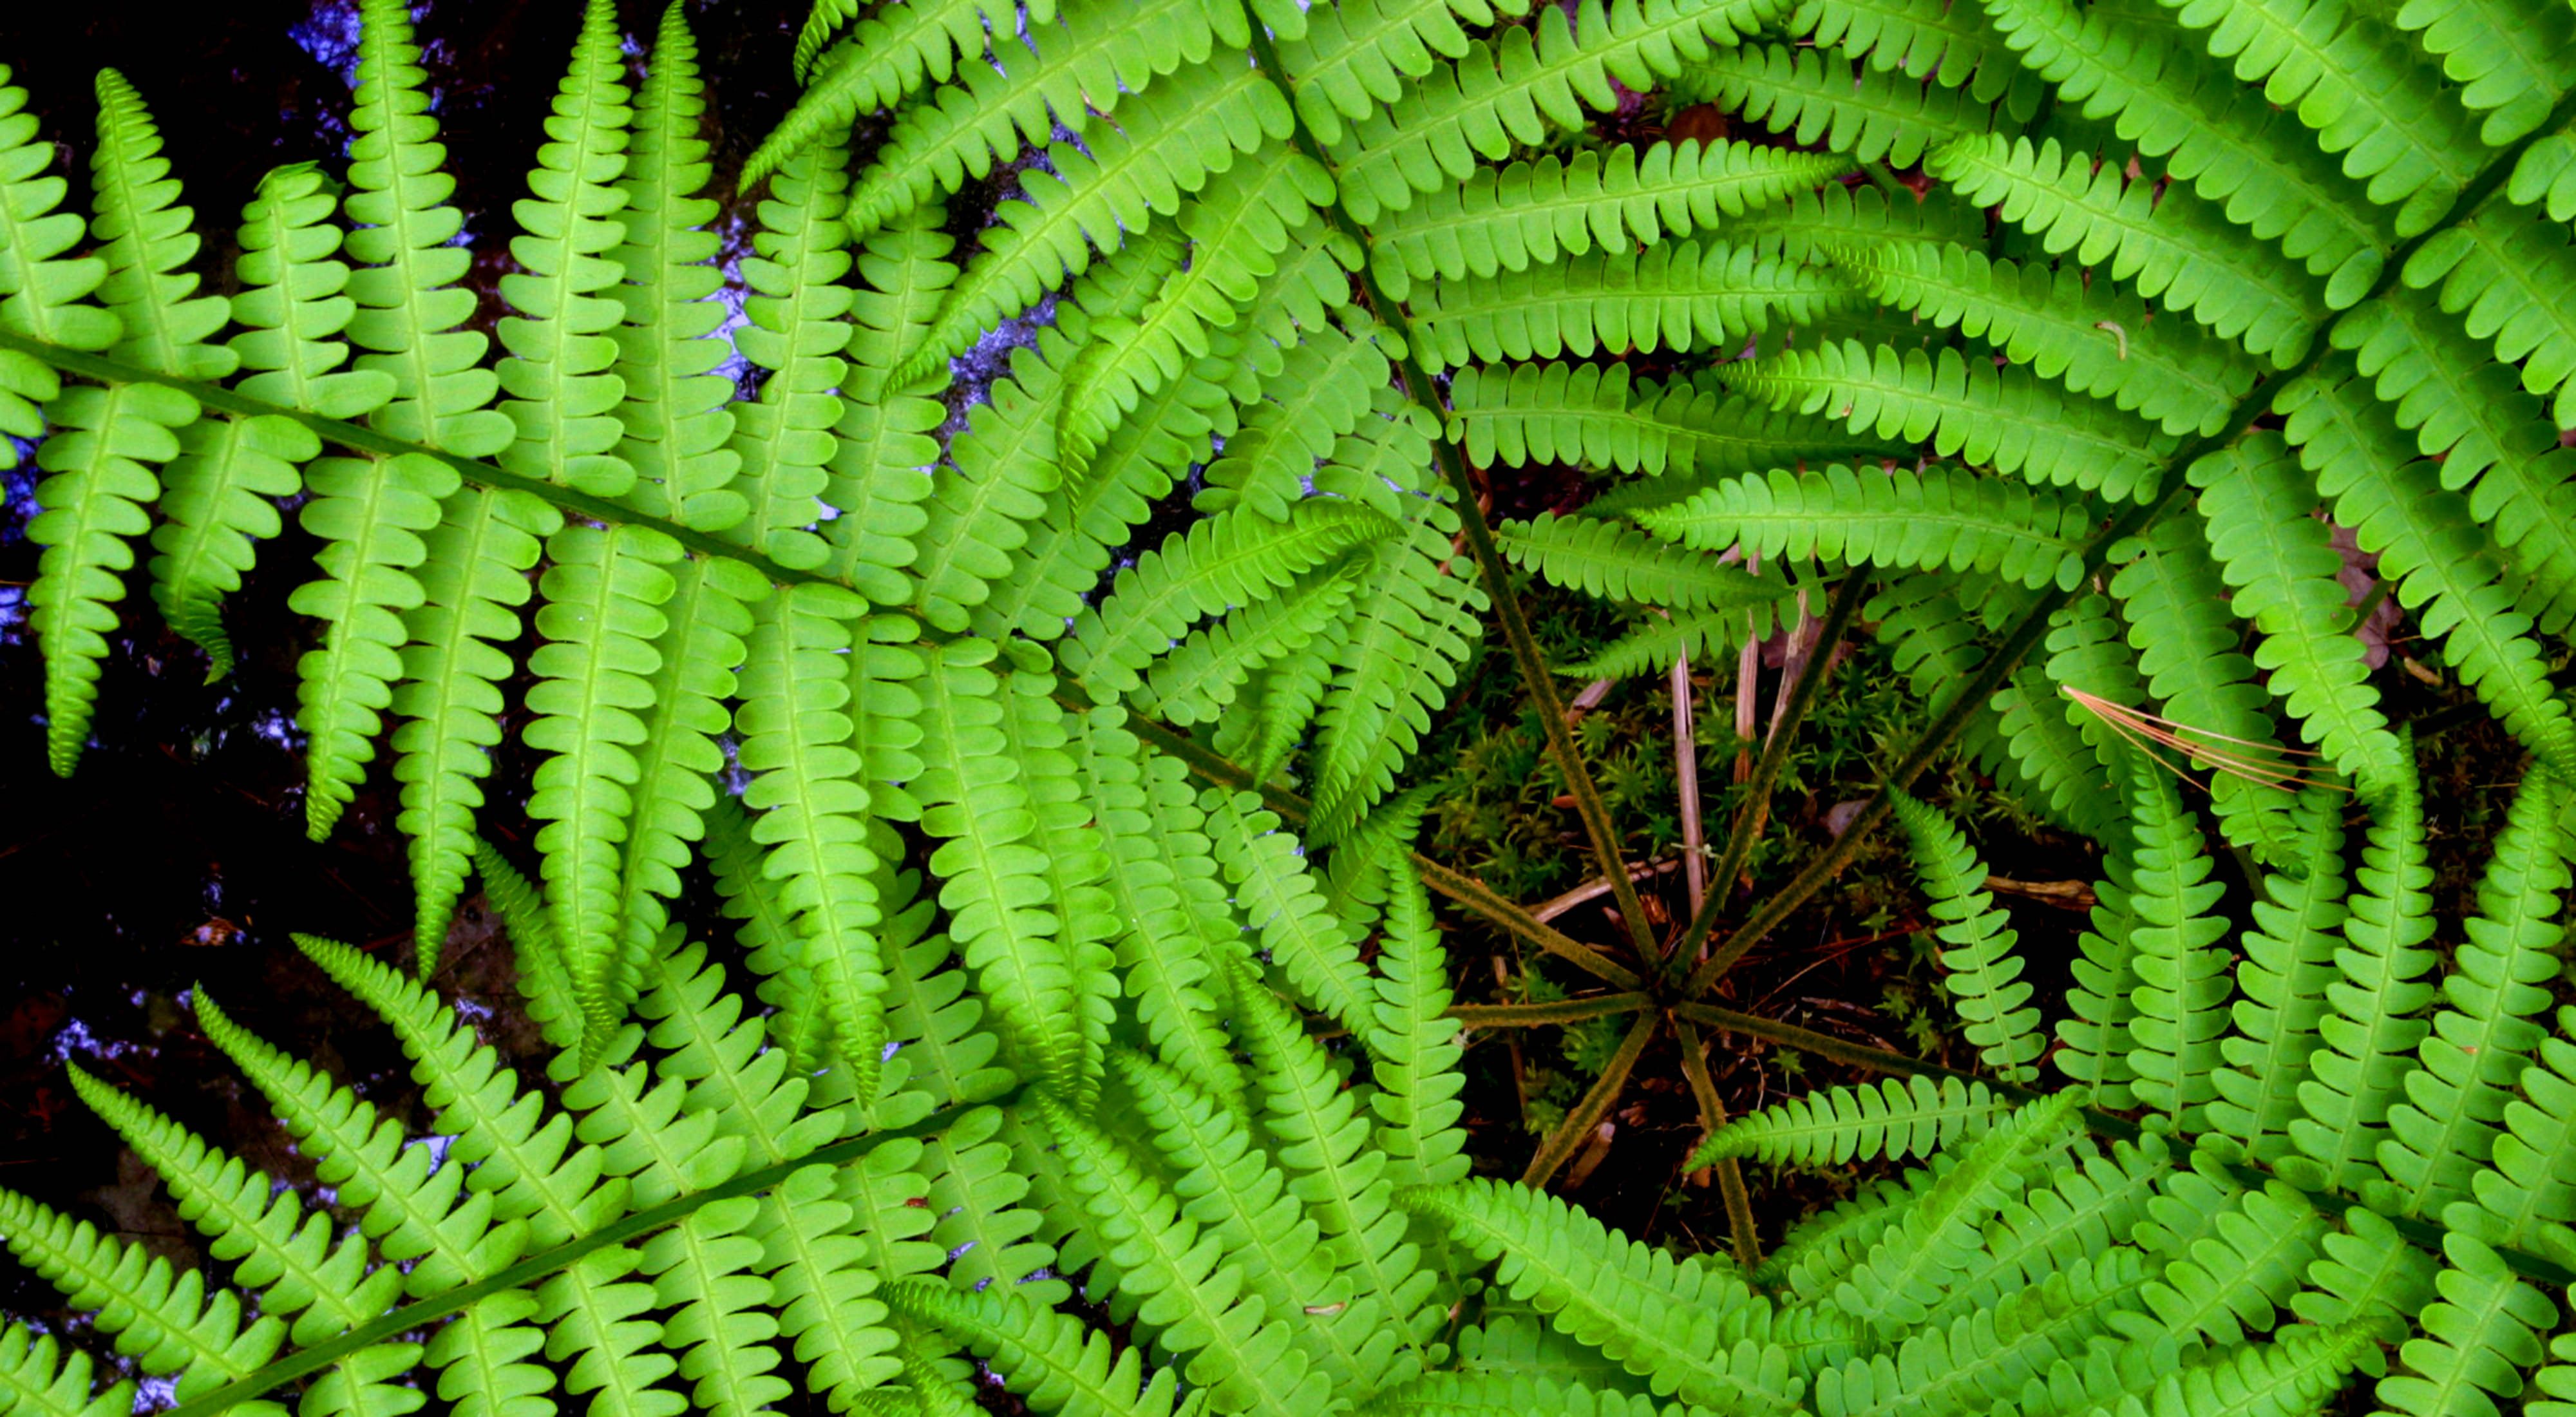 Looking down on bright green fern fronds.